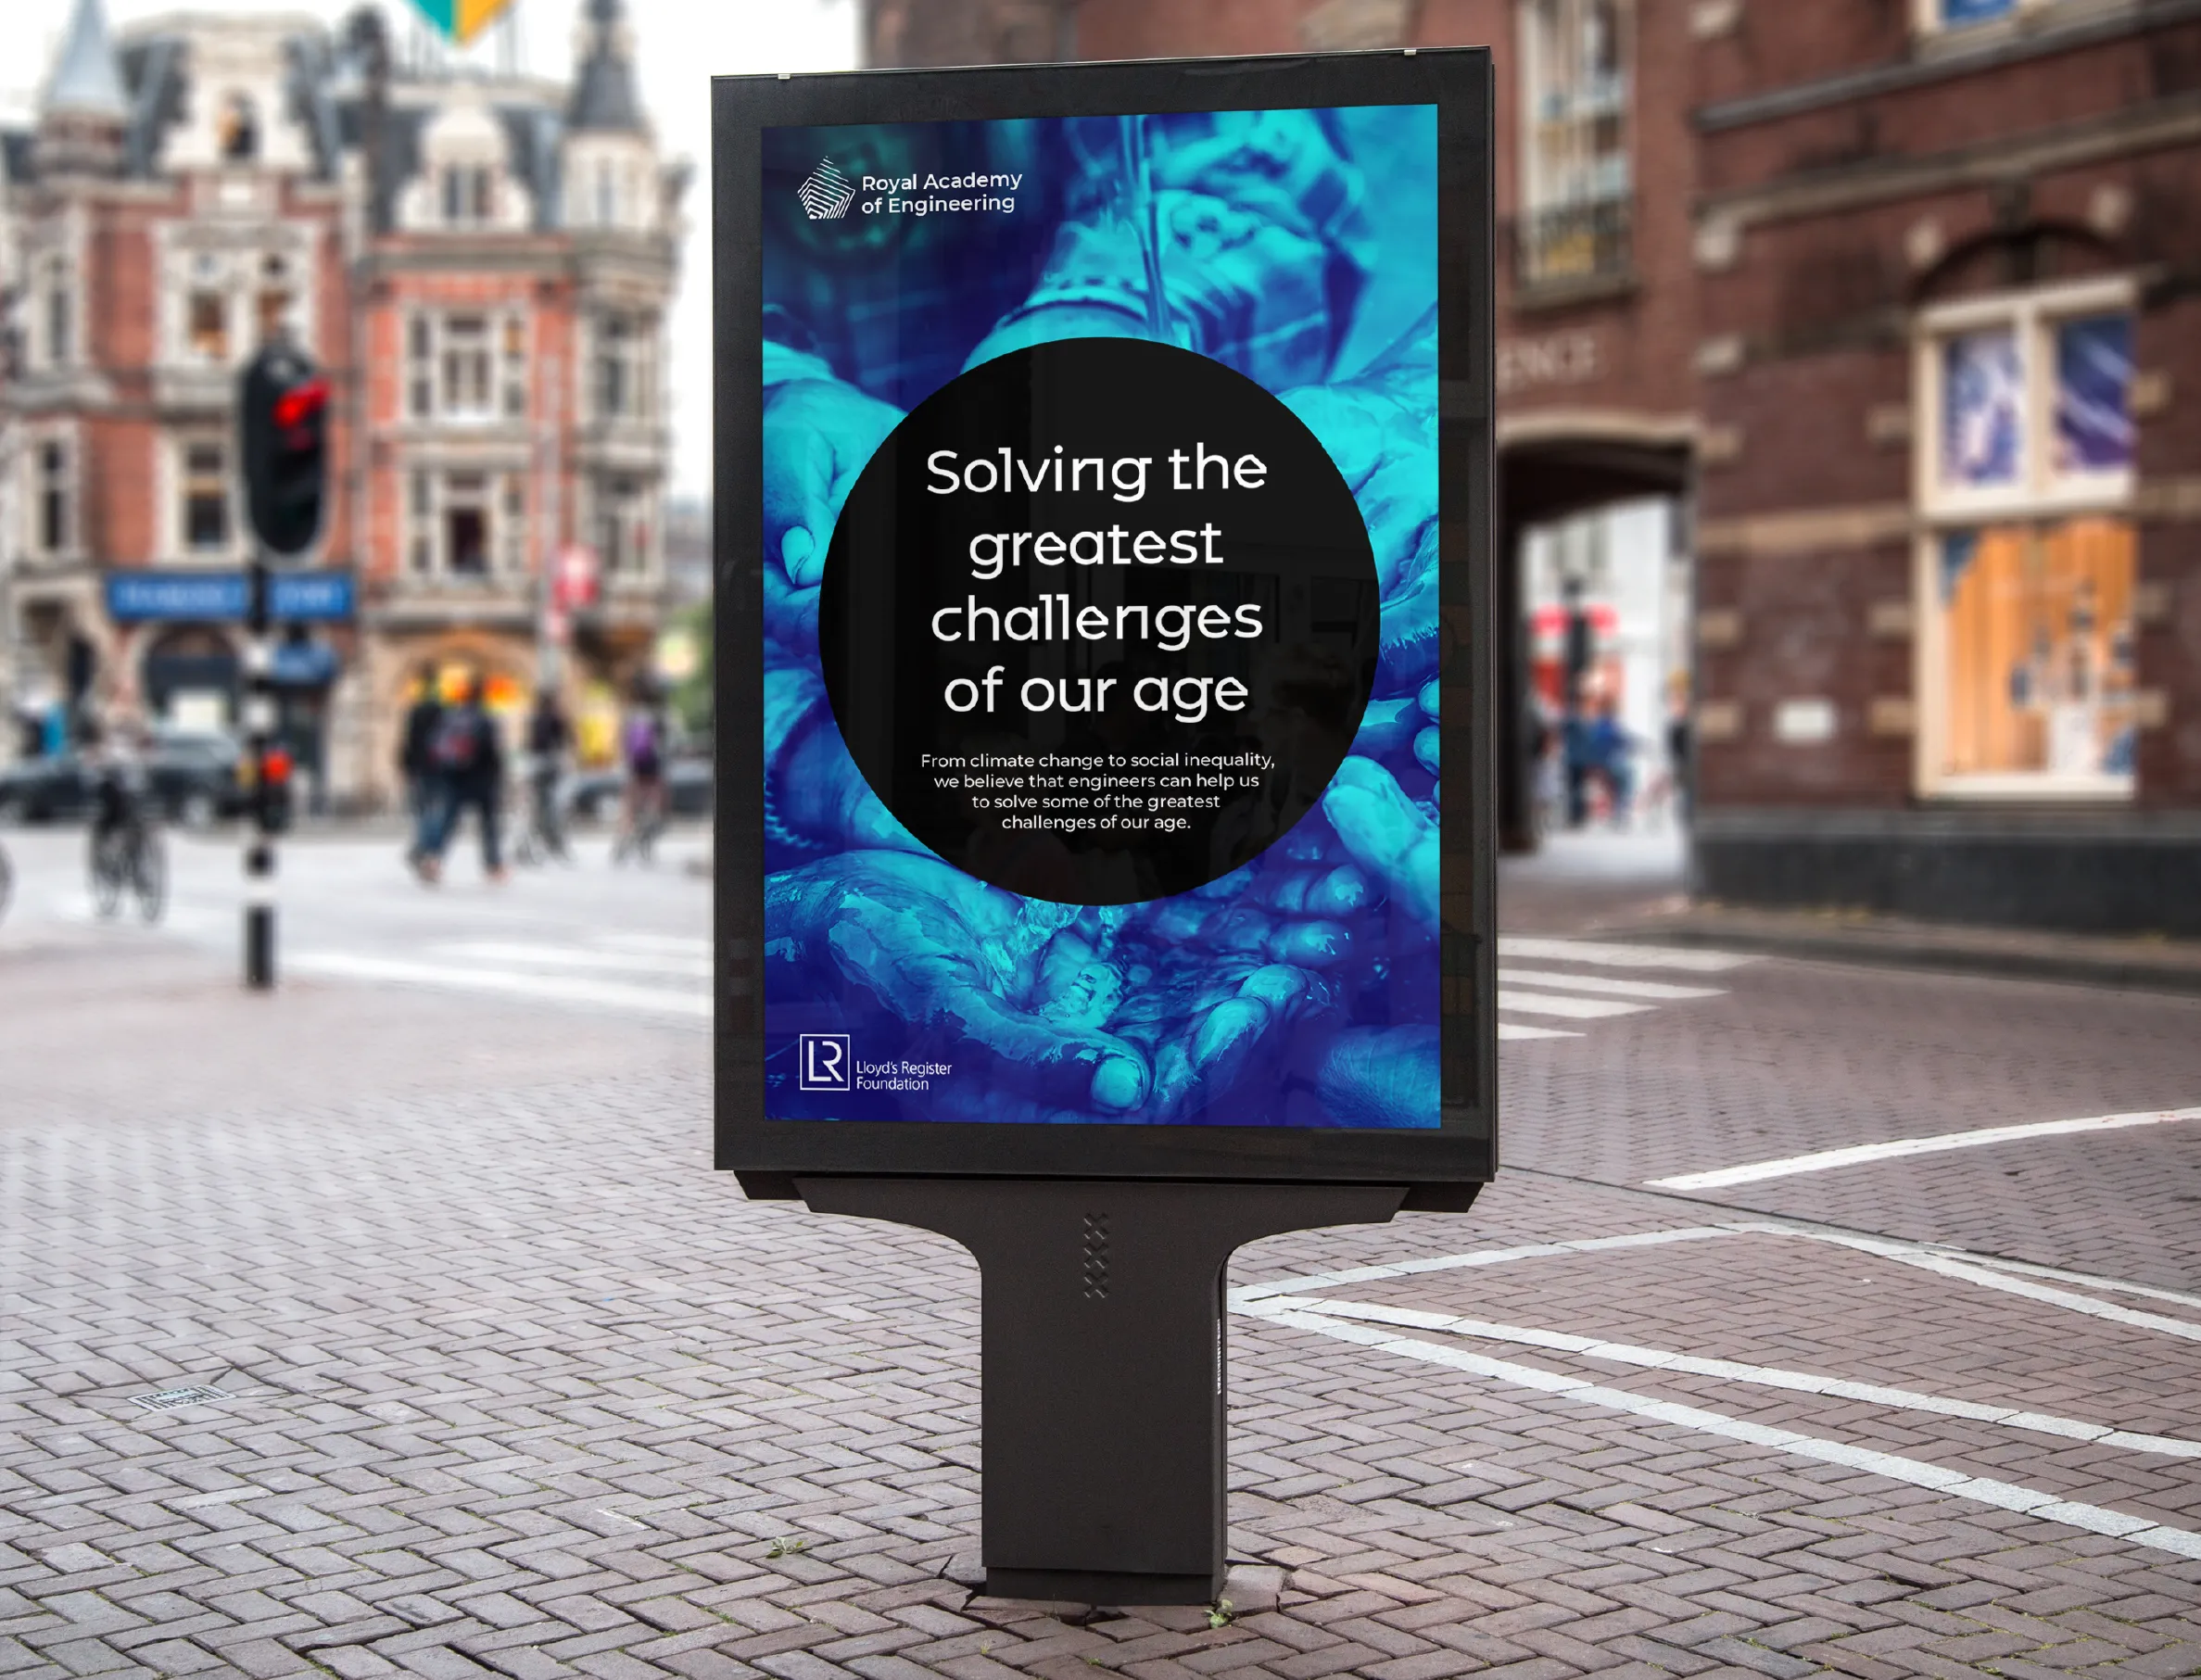 Campaign poster design for Royal Academy of Engineering, which reads "Solving the greatest challenges of our age'"